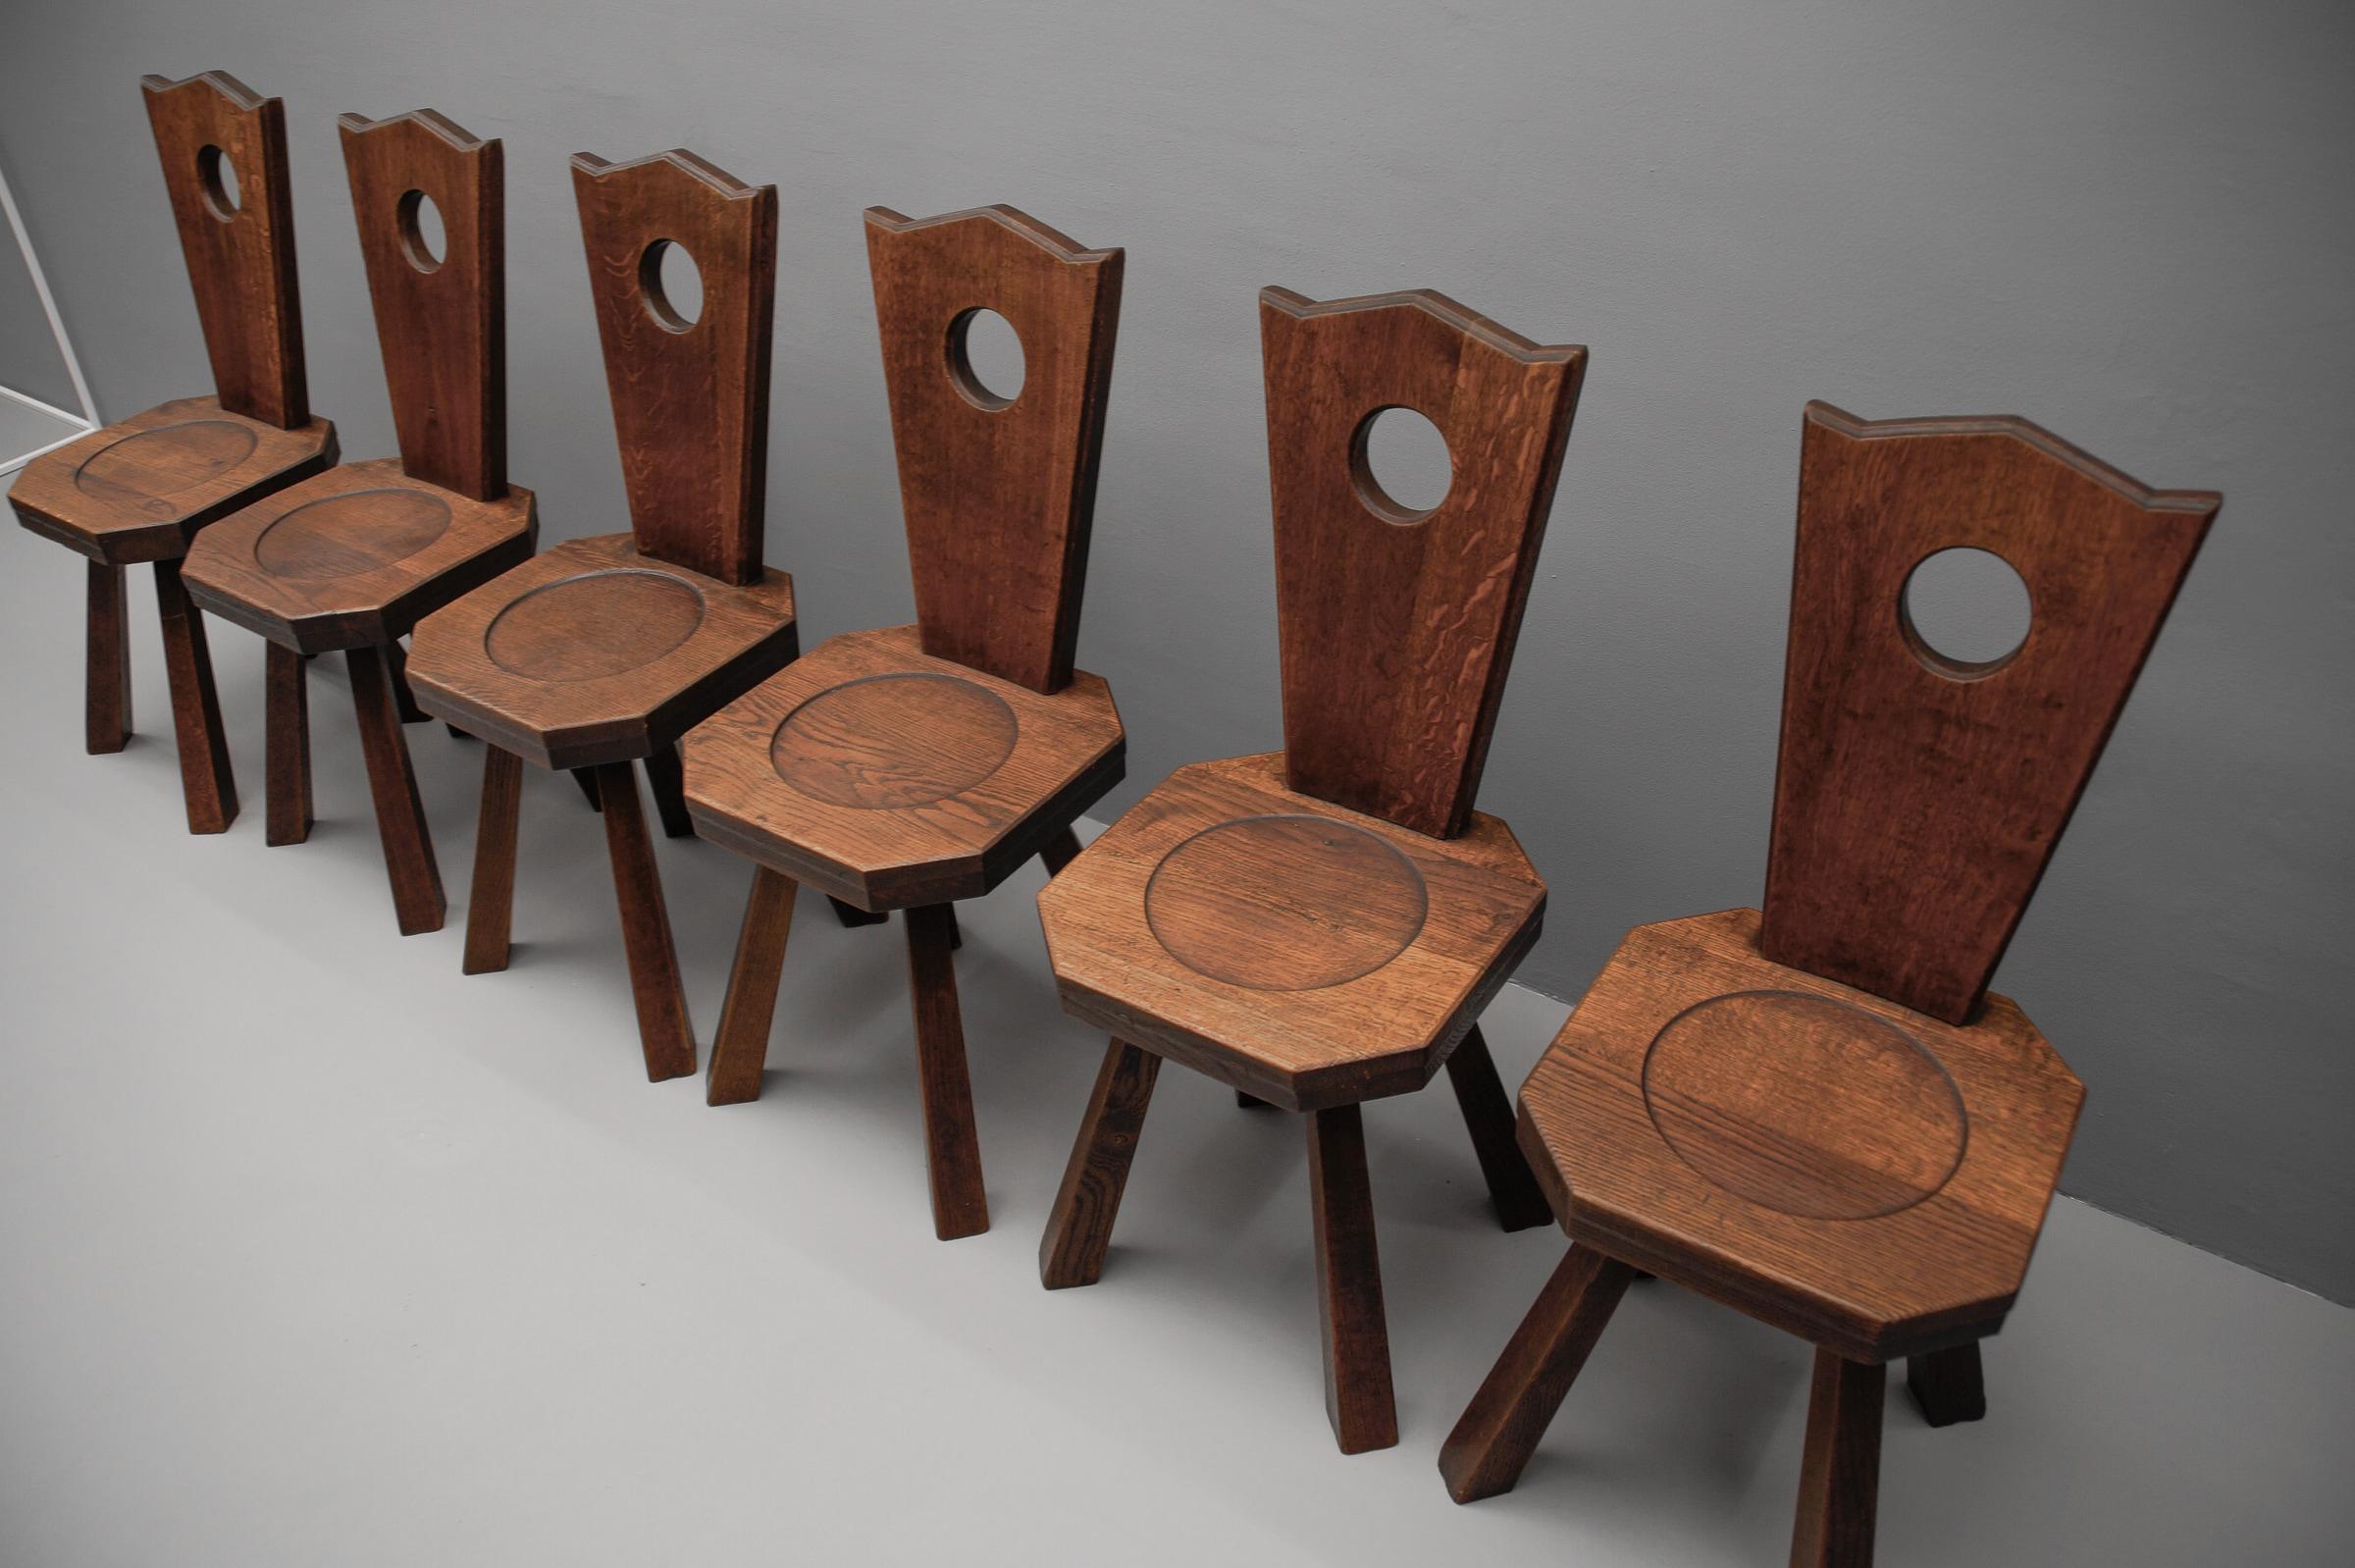 Set of 6 French Provincial Brutalist Rustic Oak Chairs, 1960s France In Good Condition For Sale In Nürnberg, Bayern